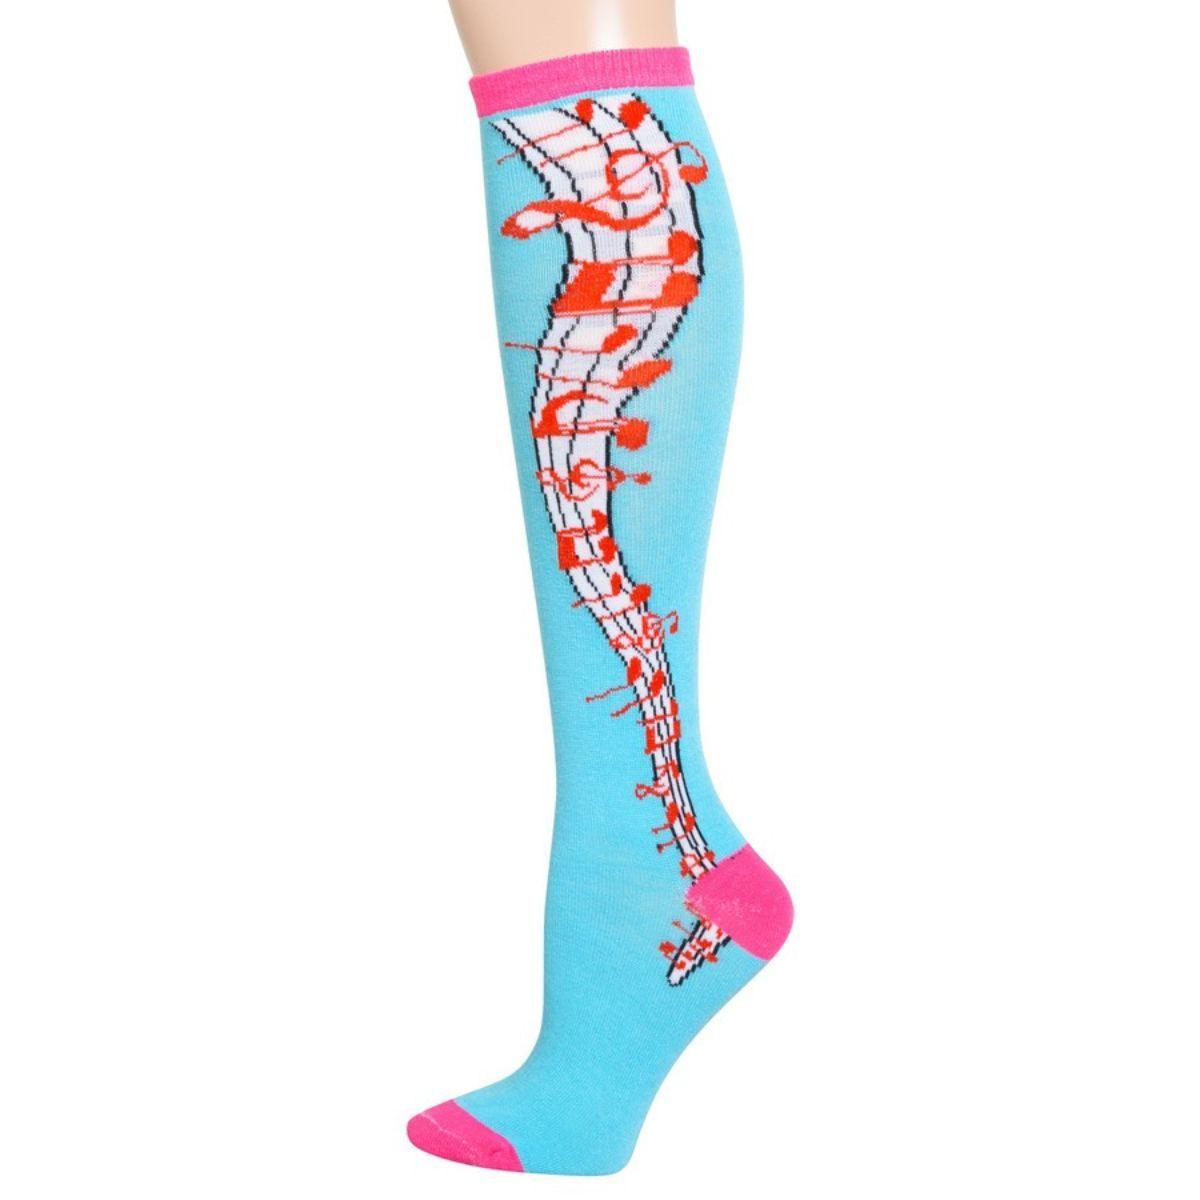 Aqua Musical Notes Socks for Women: Accessories in Harmony